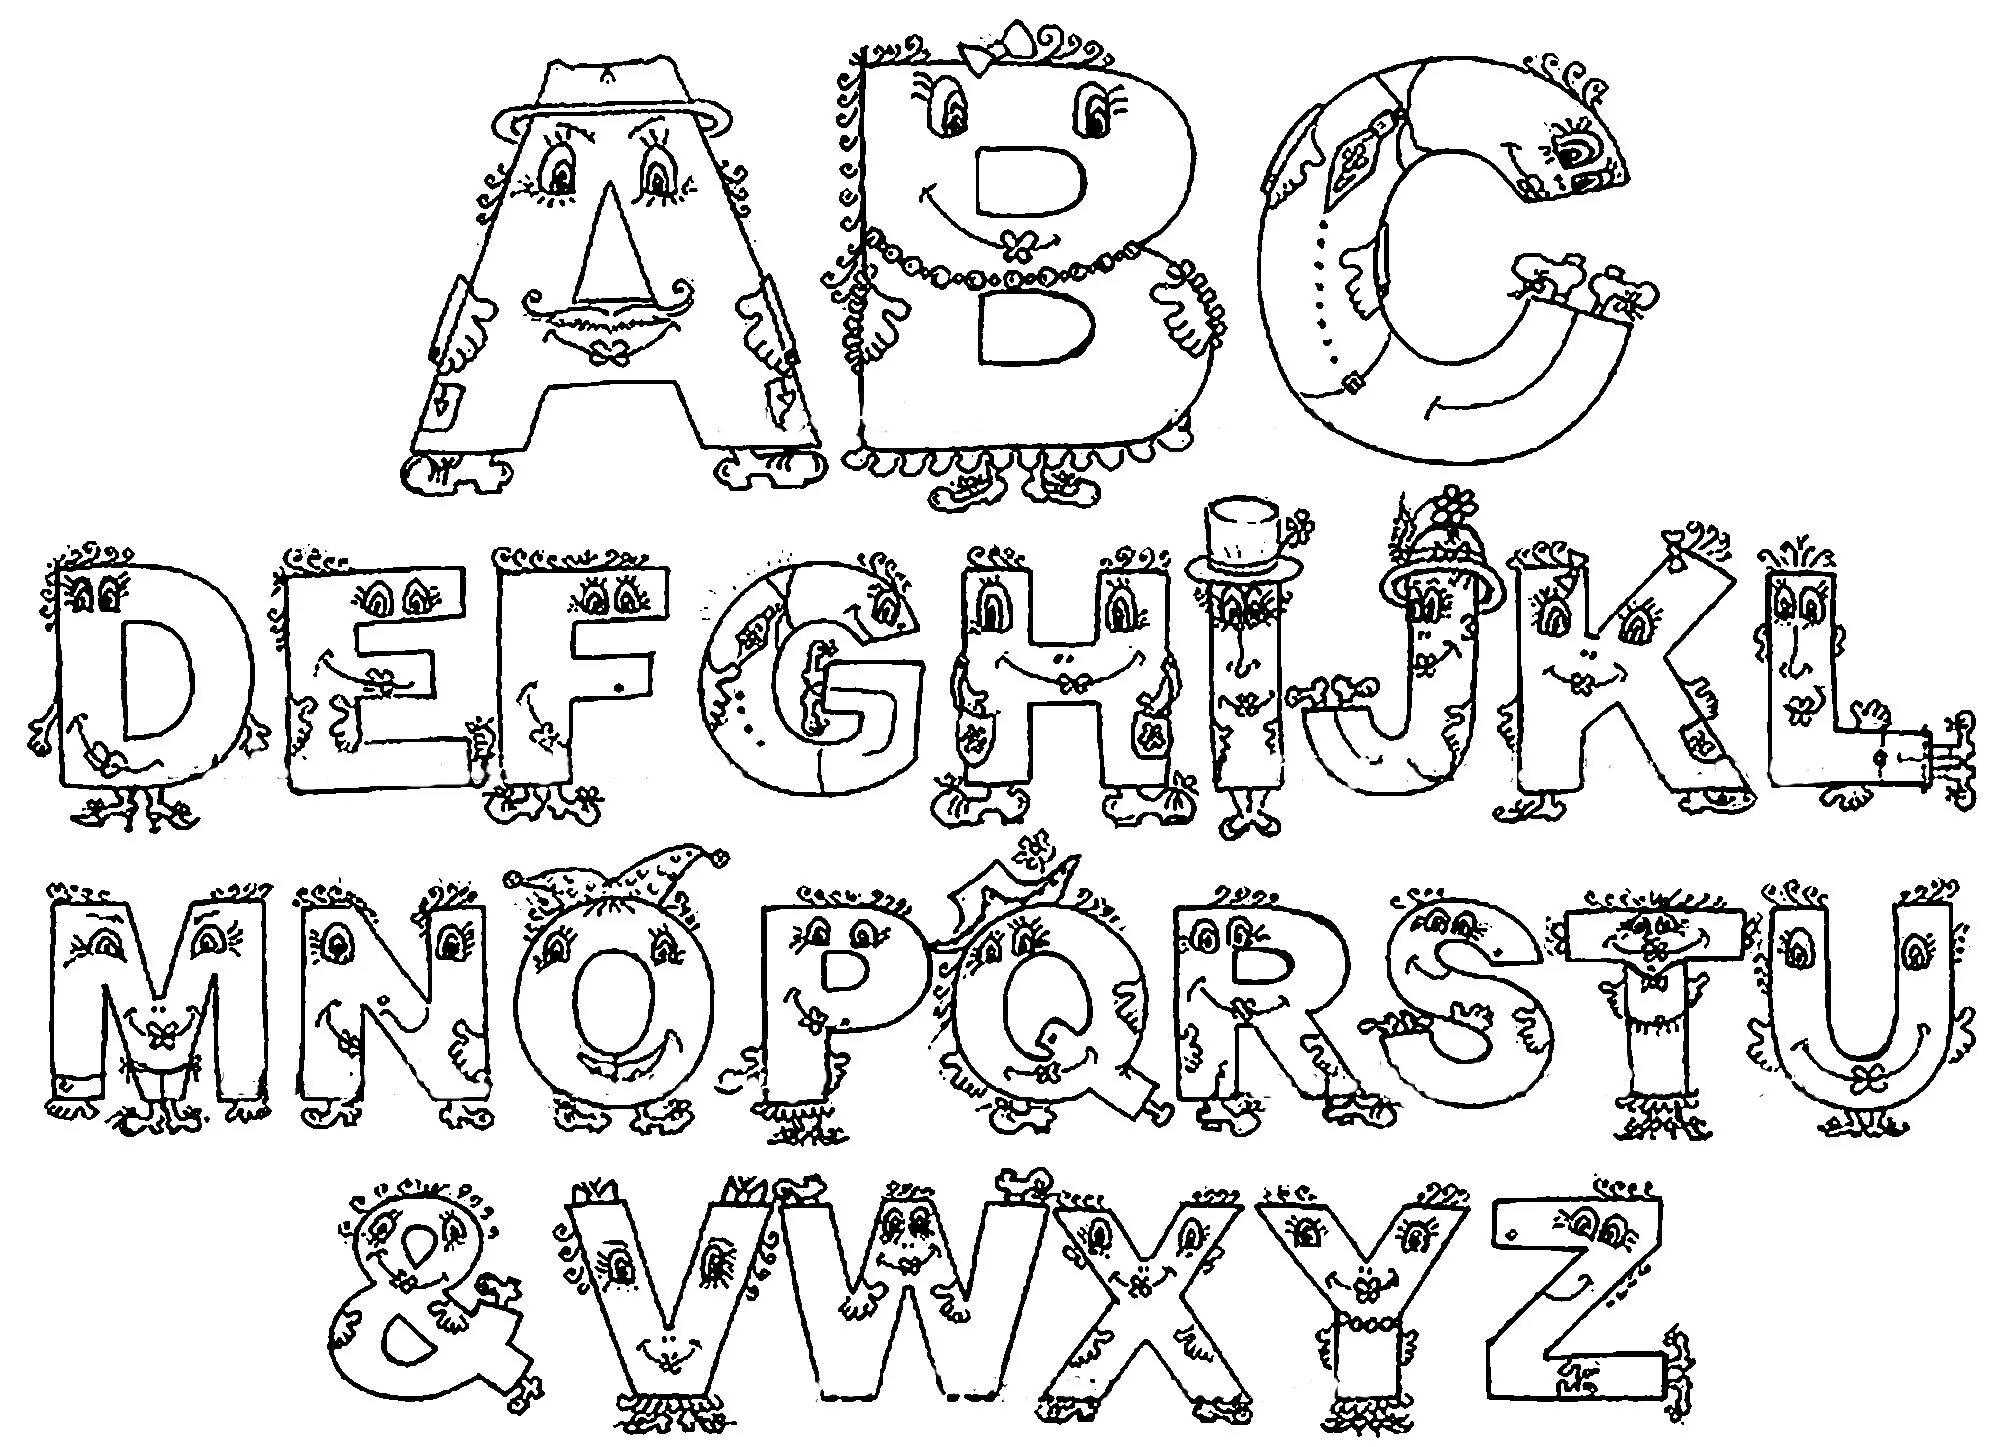 Colorful lore alphabet coloring page for kids to develop their knowledge